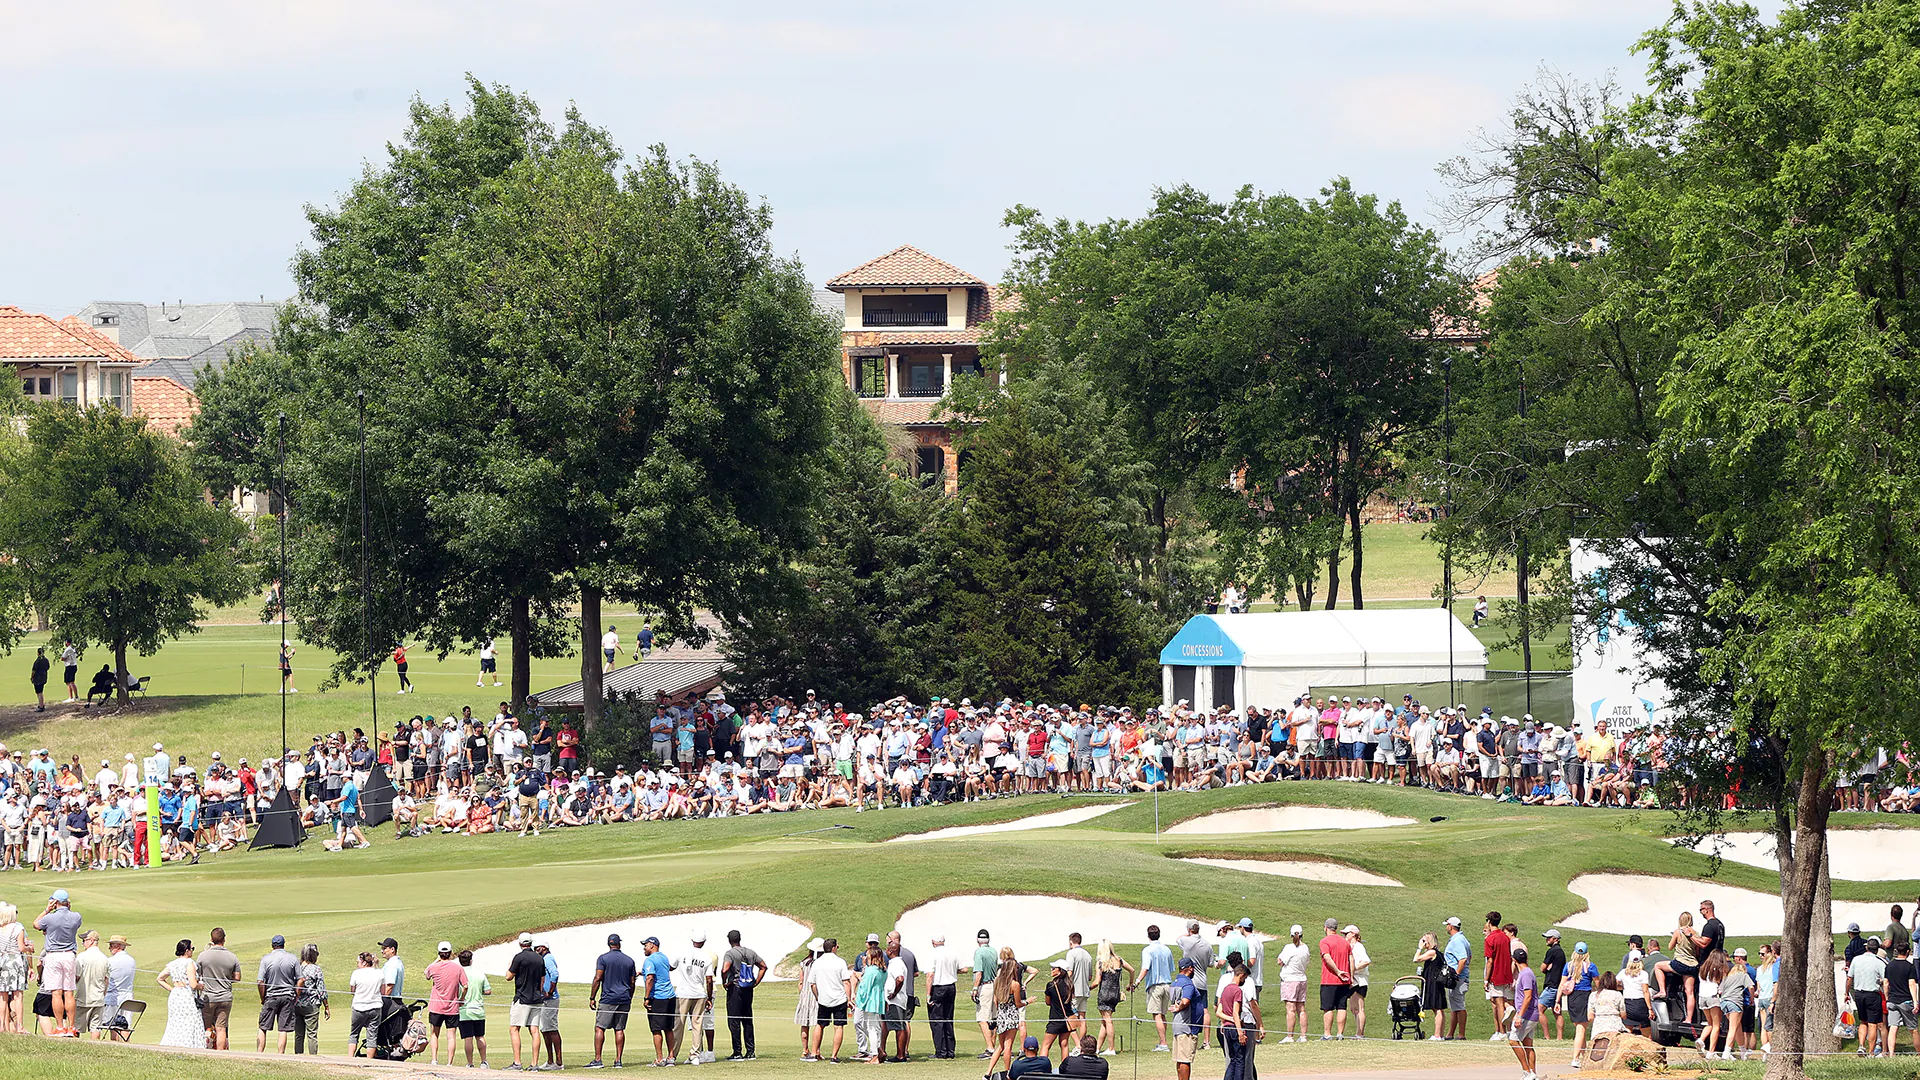 This week in golf: TV sked, tee times, info for Byron Nelson and other tours